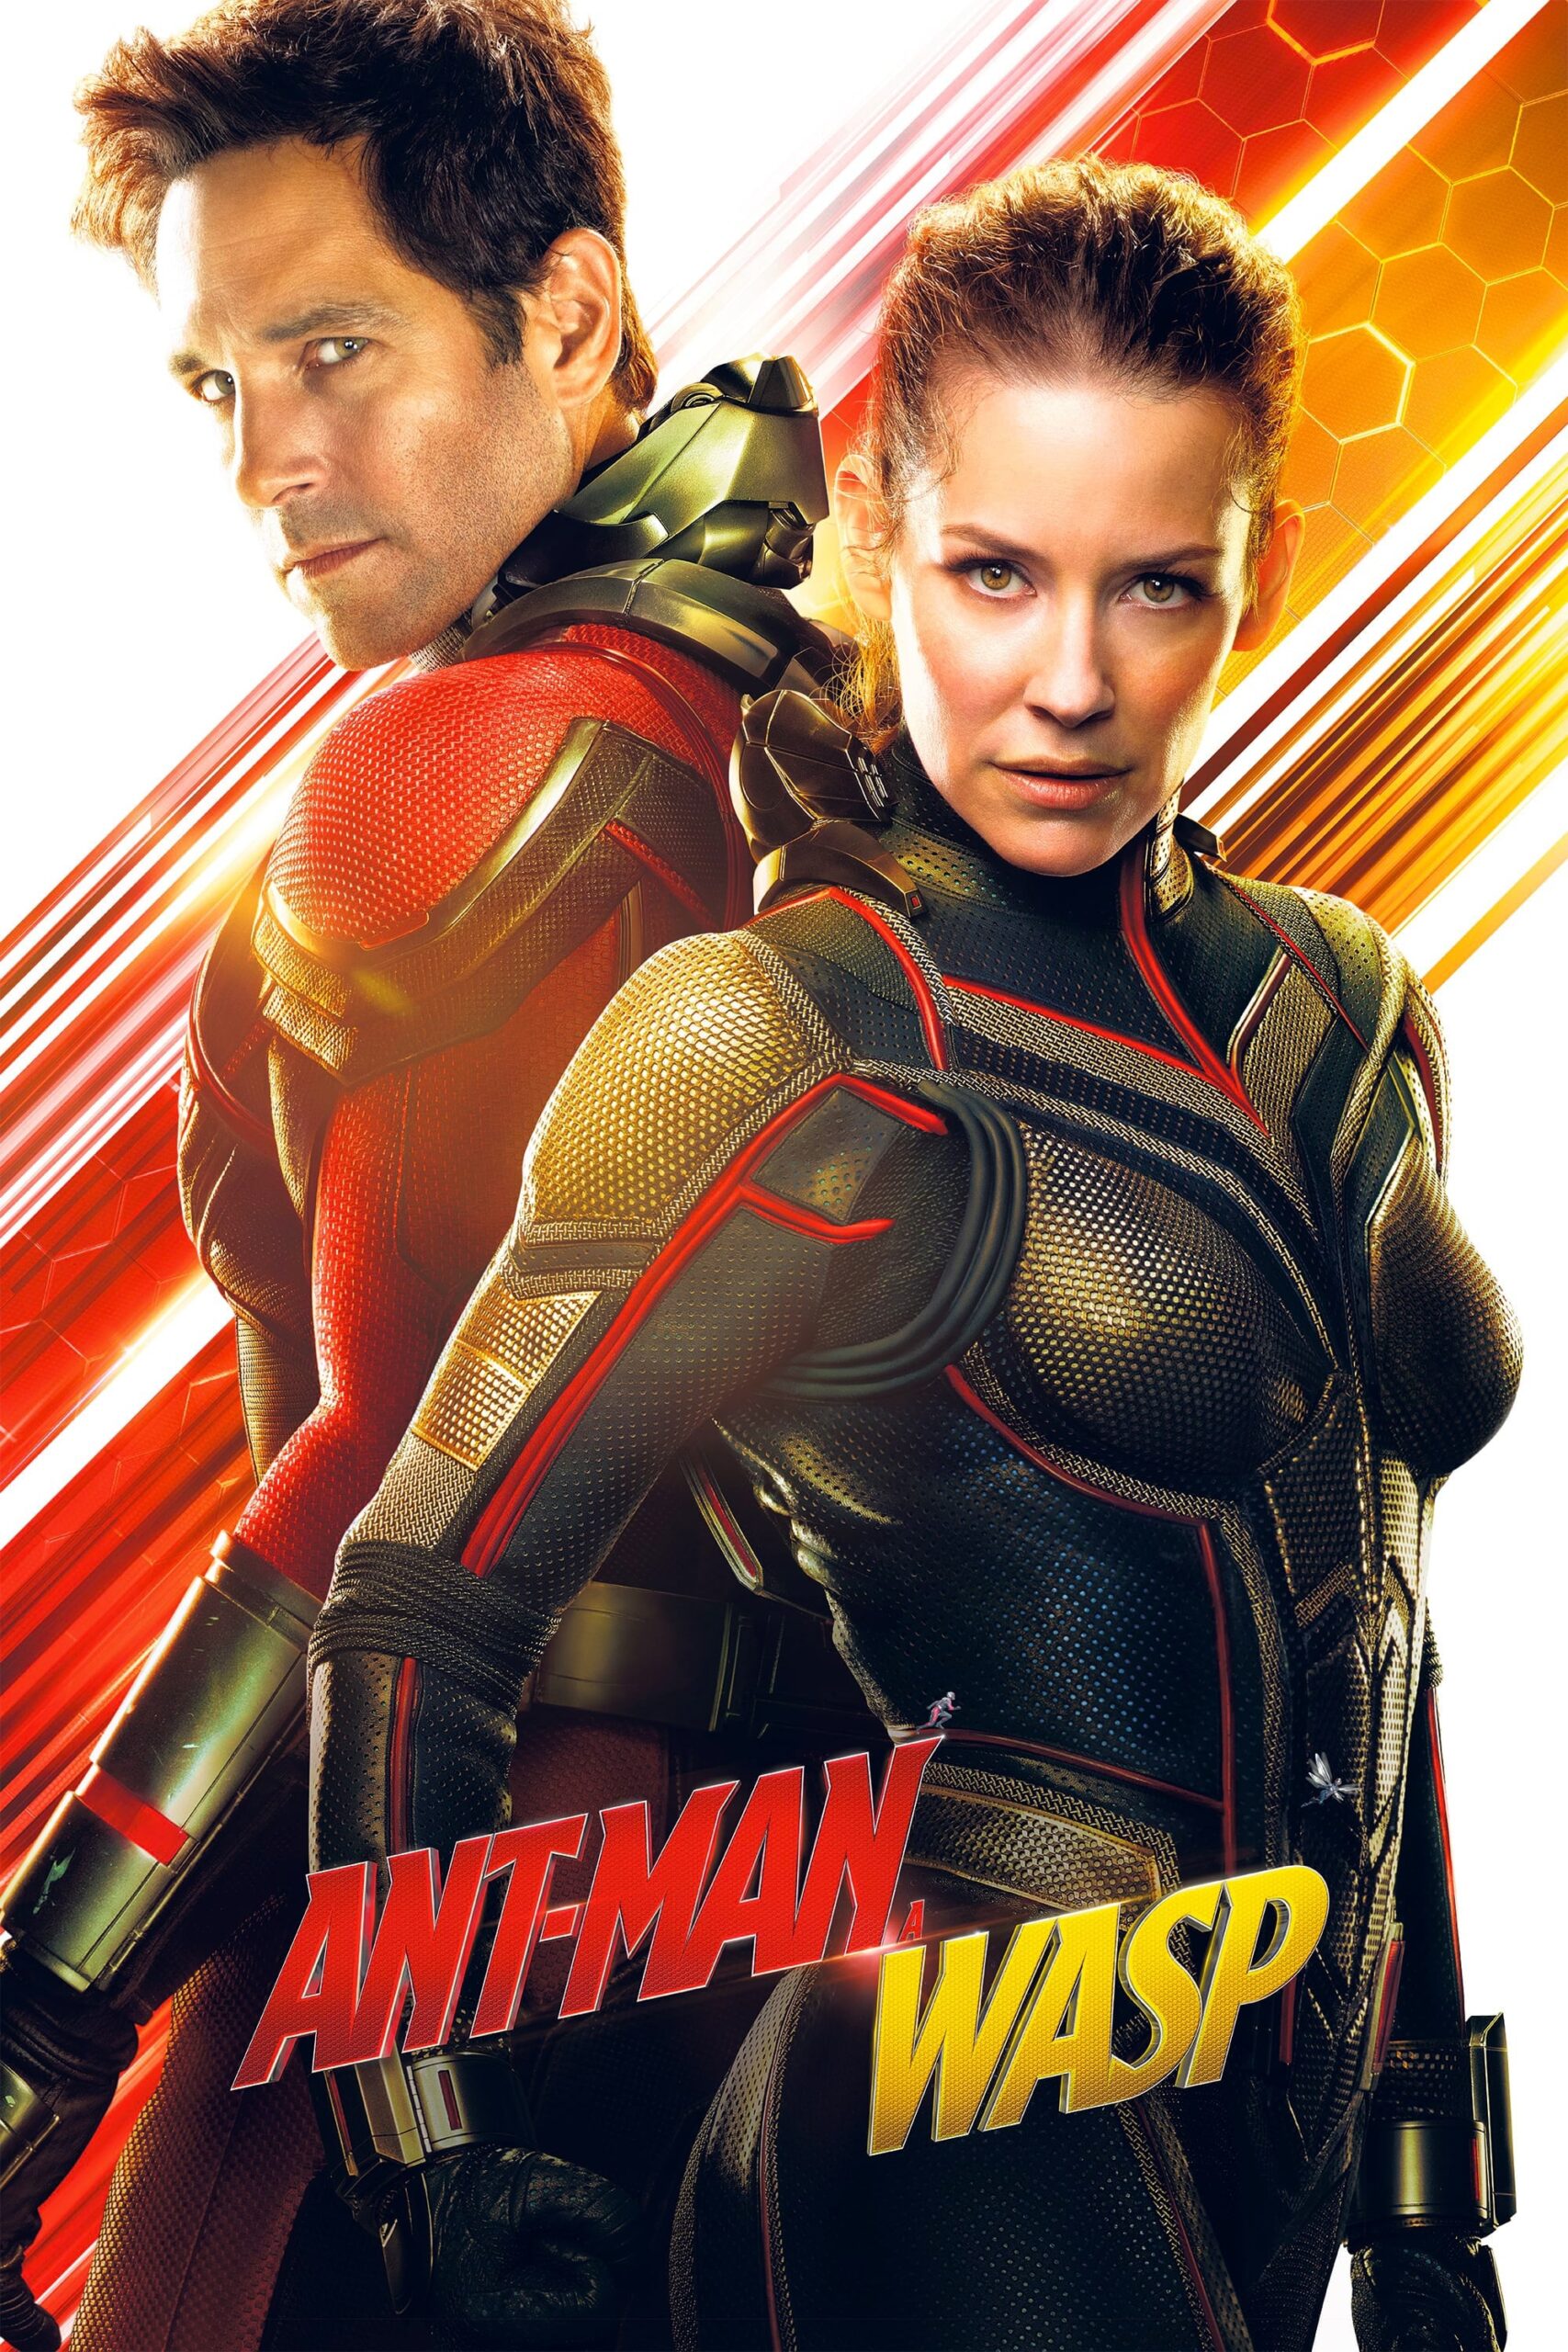 Poster for the movie "Ant-Man a Wasp"